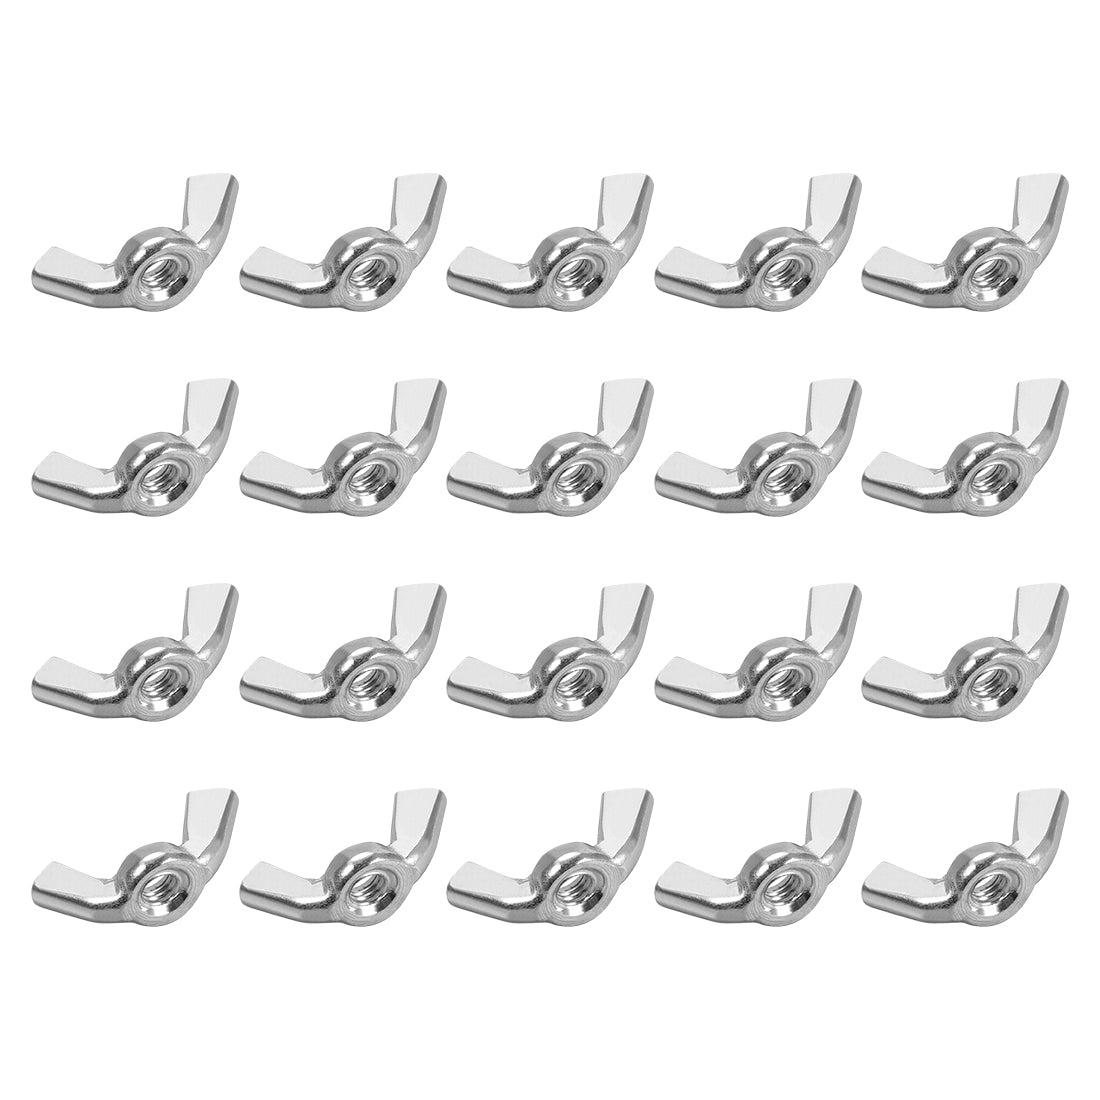 Uxcell Uxcell M8 Wing Nuts, Carbon Steel Zinc Plated Hand Twist Tighten Ear Butterfly Nut, 20 Pcs